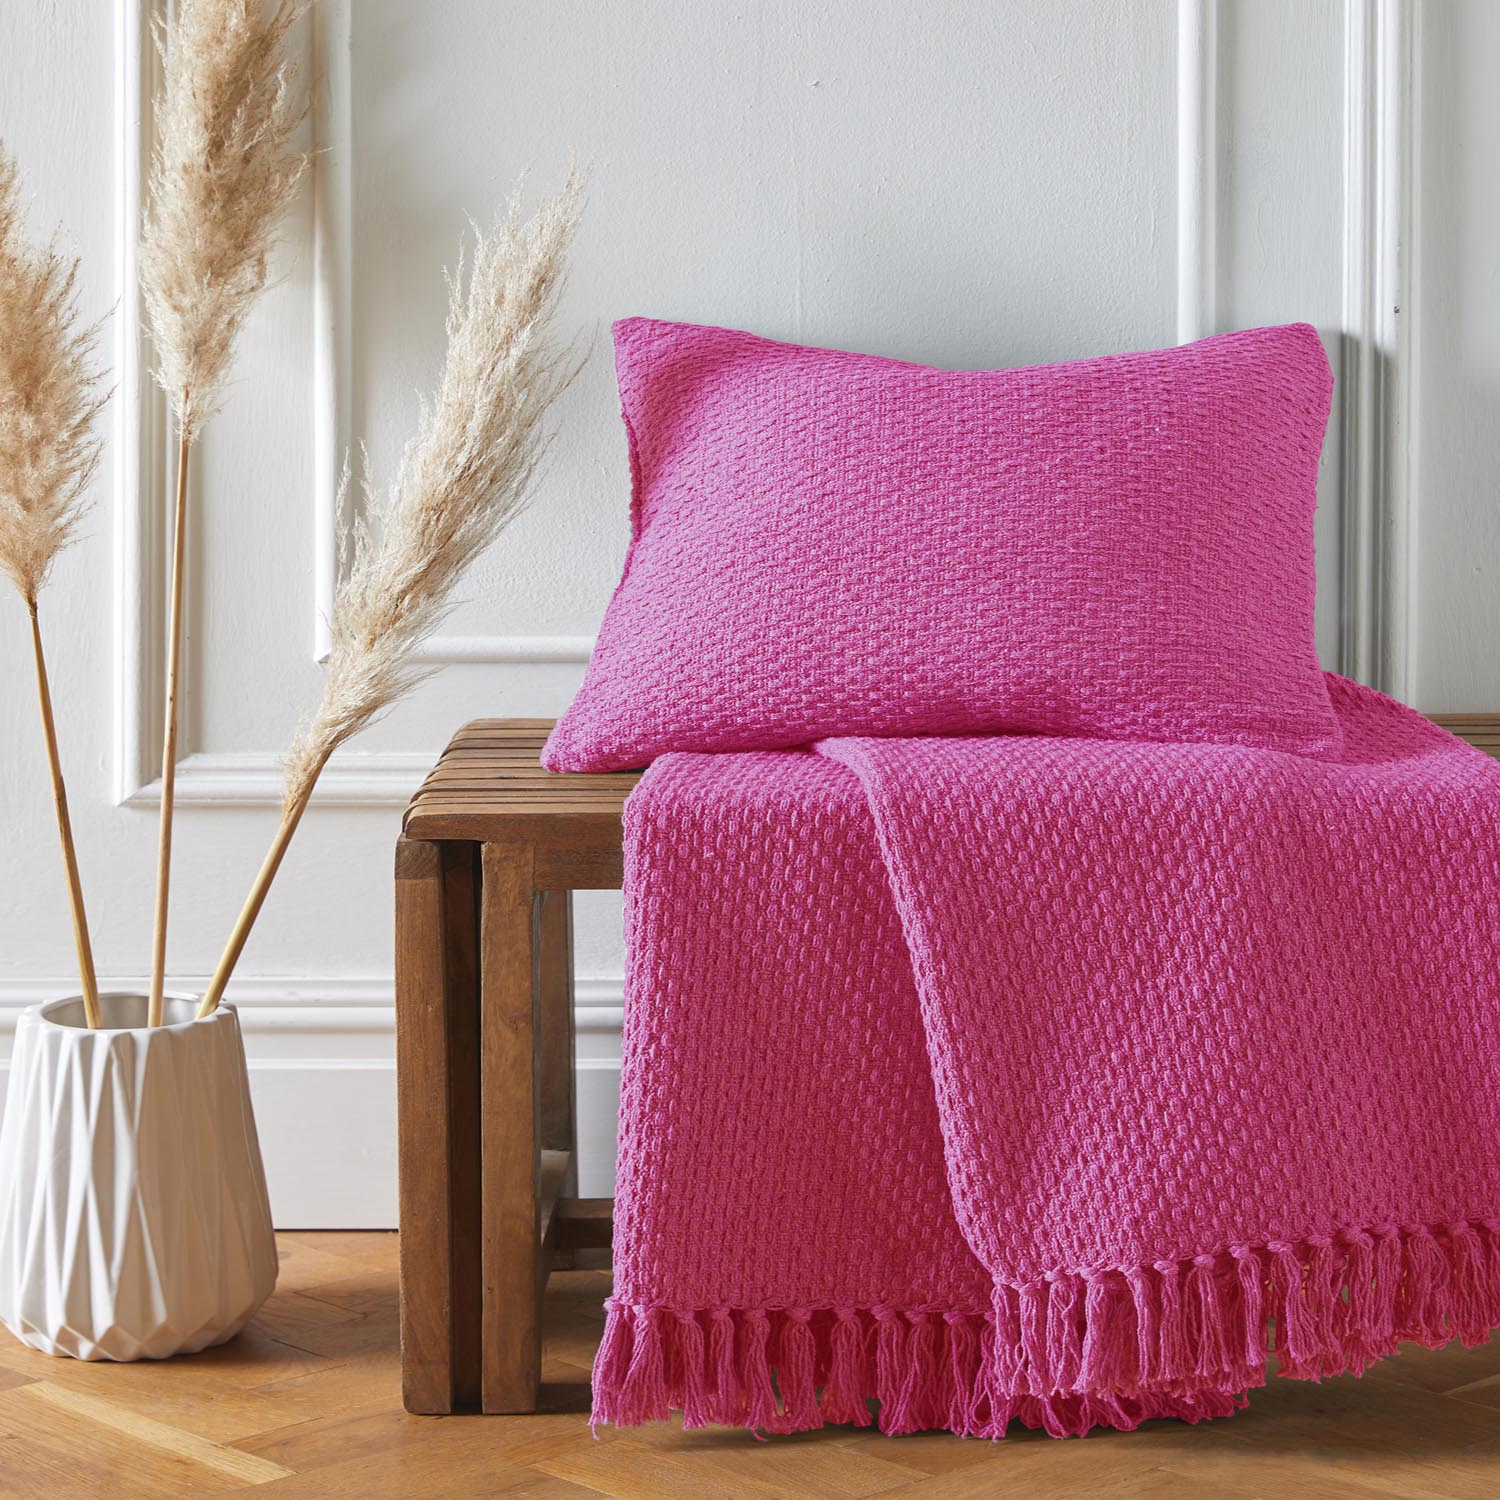 The Home Collection Hanson Pink Throw 200 X 200 1 Shaws Department Stores